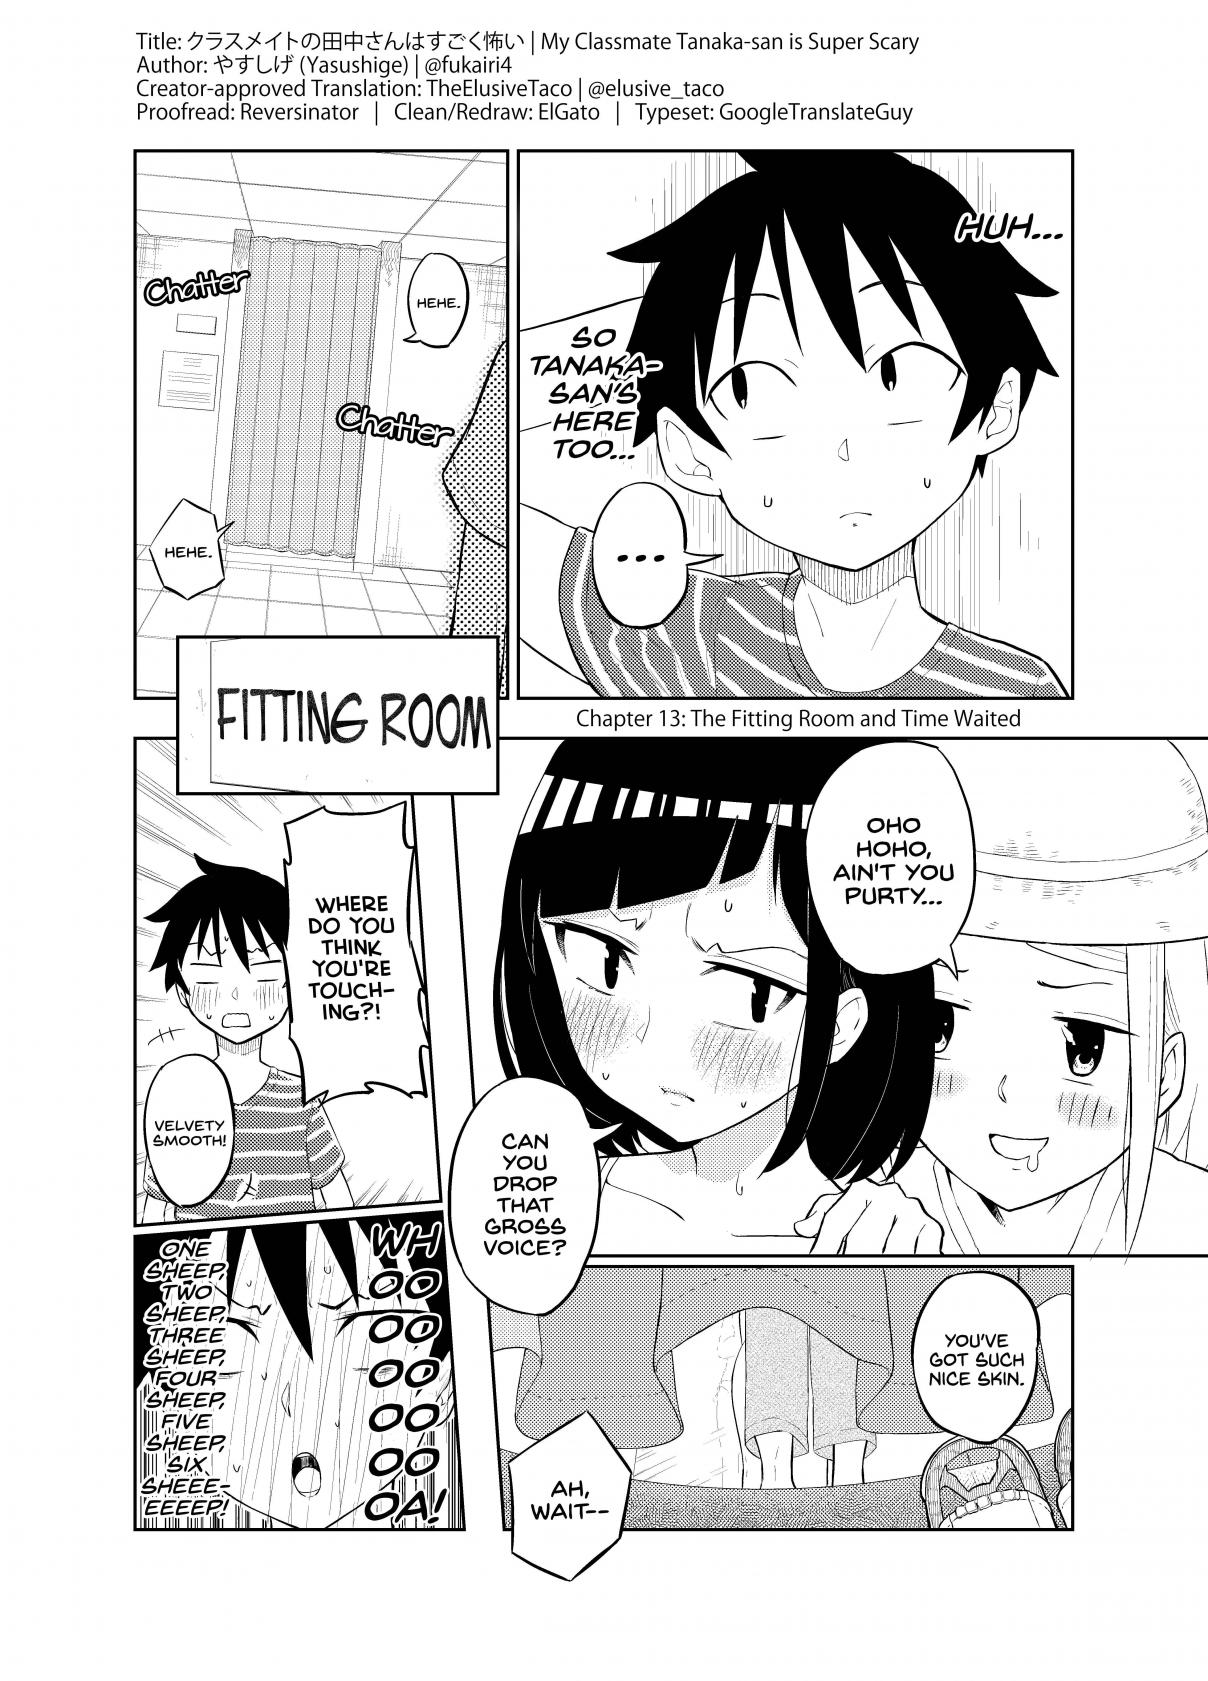 My Classmate Tanaka san is Super Scary Ch. 13 The Fitting Room and Time Waited